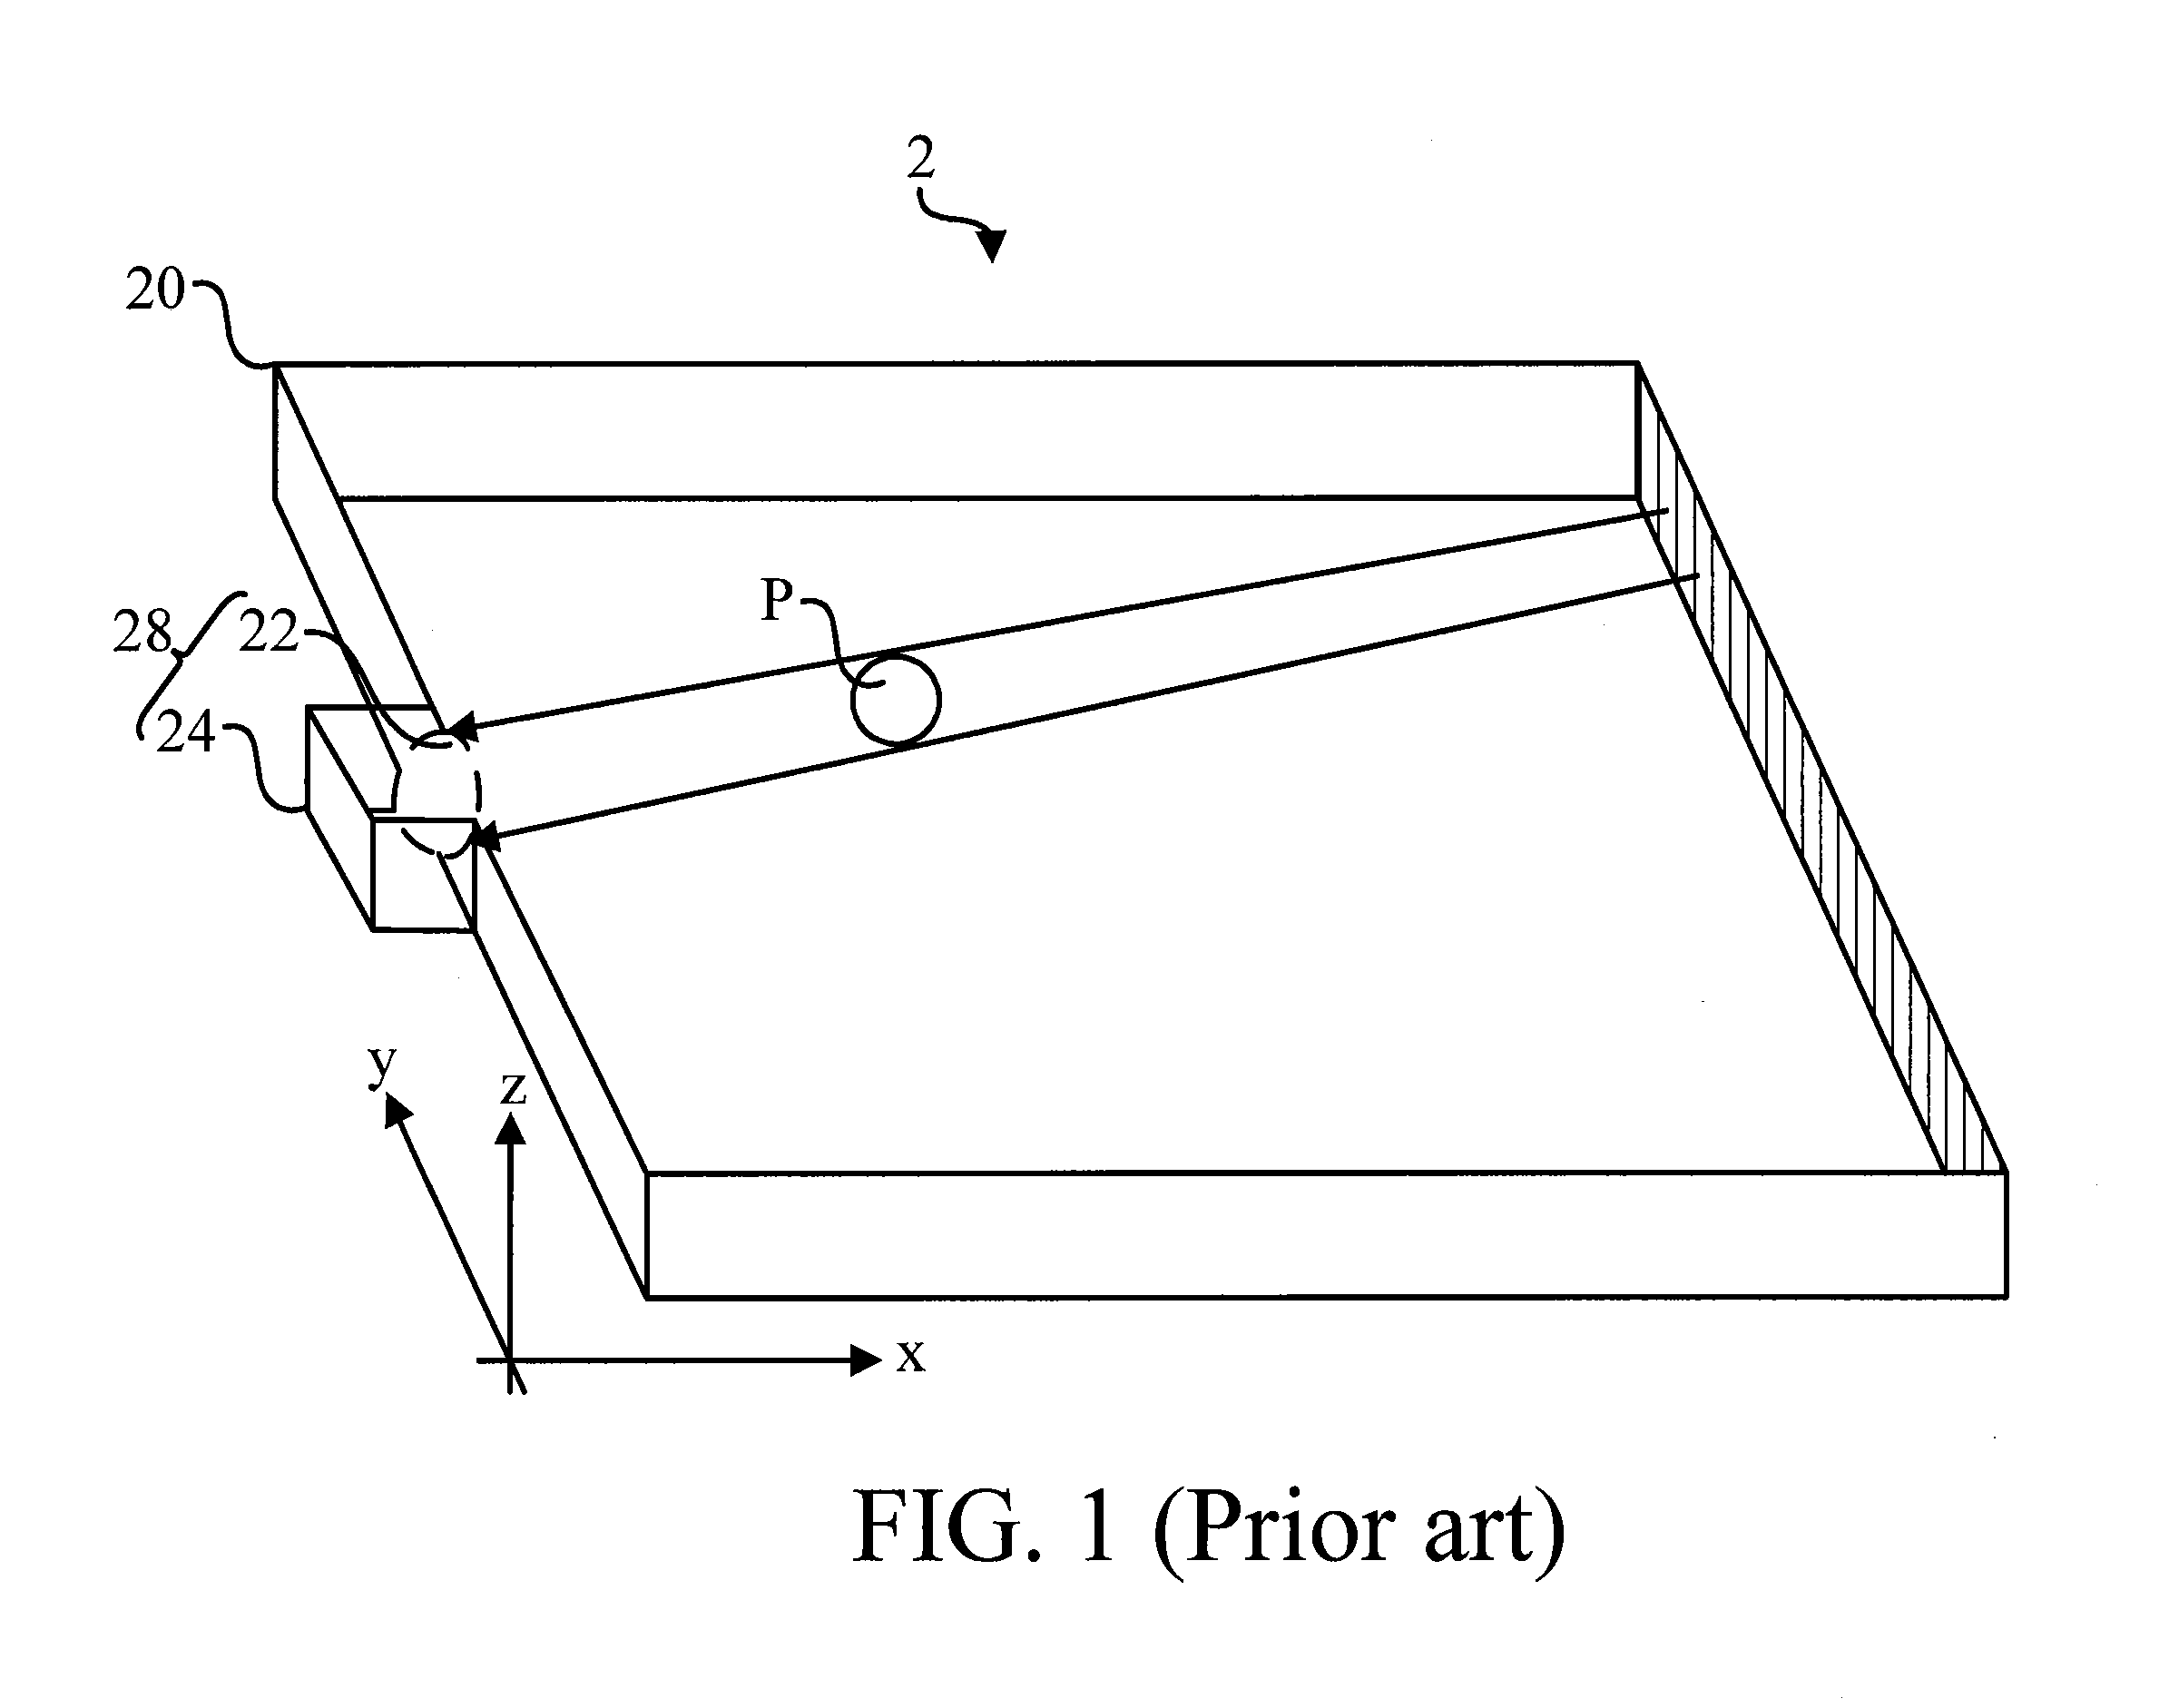 Optical touch apparatus